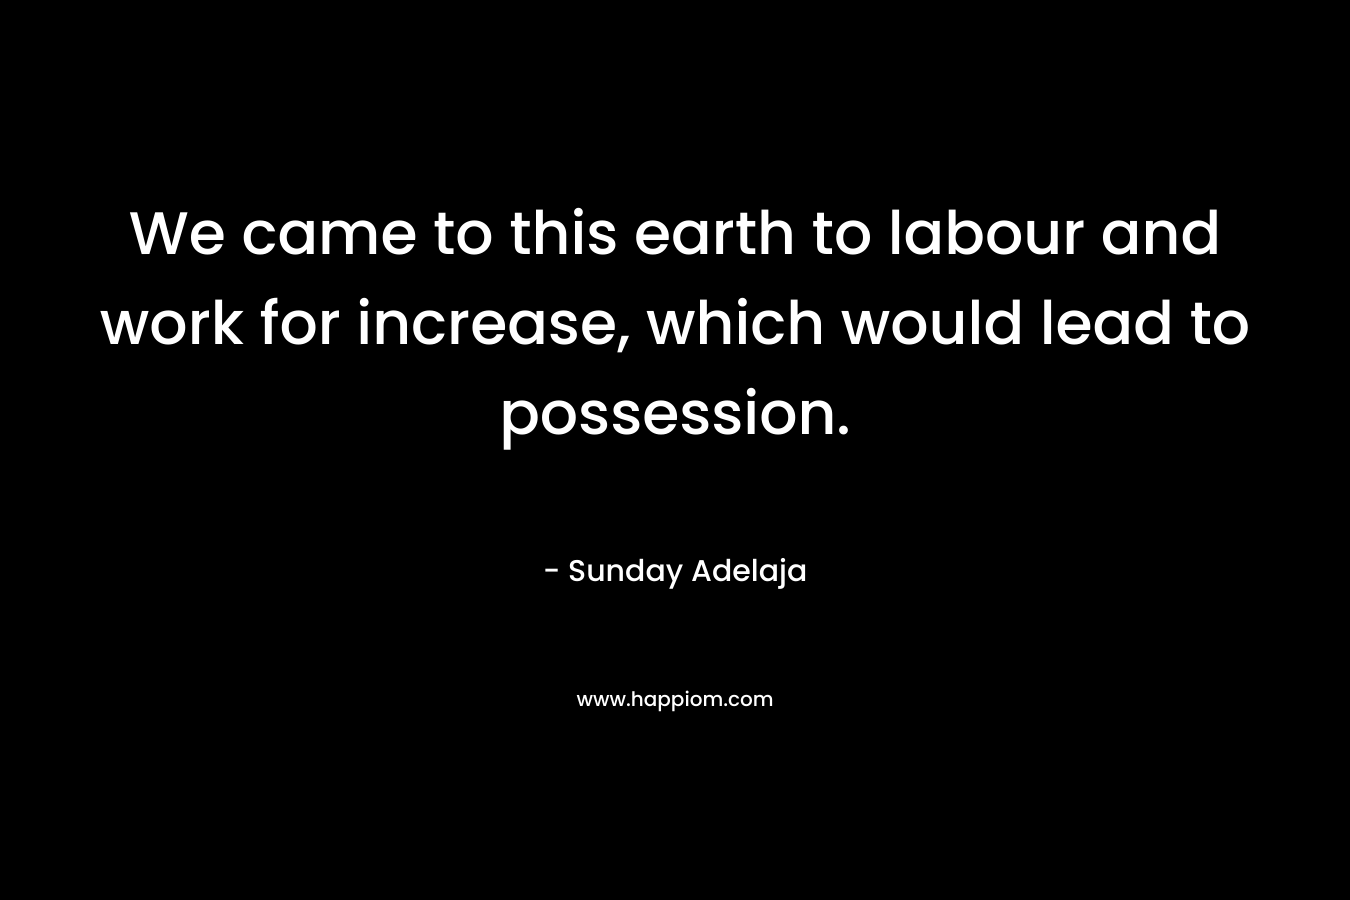 We came to this earth to labour and work for increase, which would lead to possession.